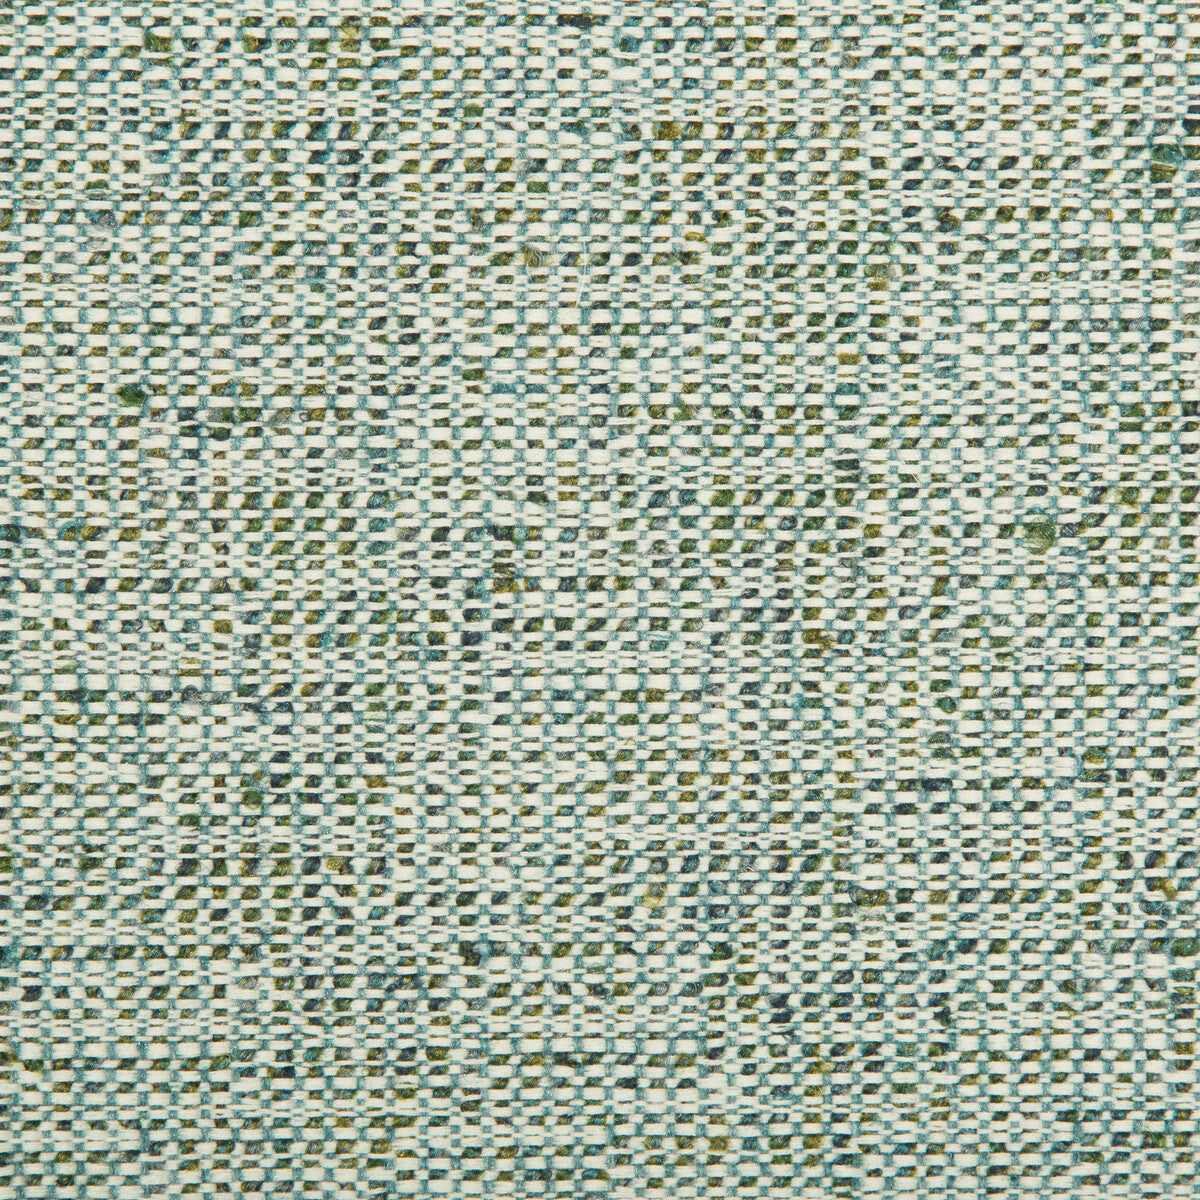 Kravet Smart fabric in 34616-135 color - pattern 34616.135.0 - by Kravet Smart in the Performance Crypton Home collection